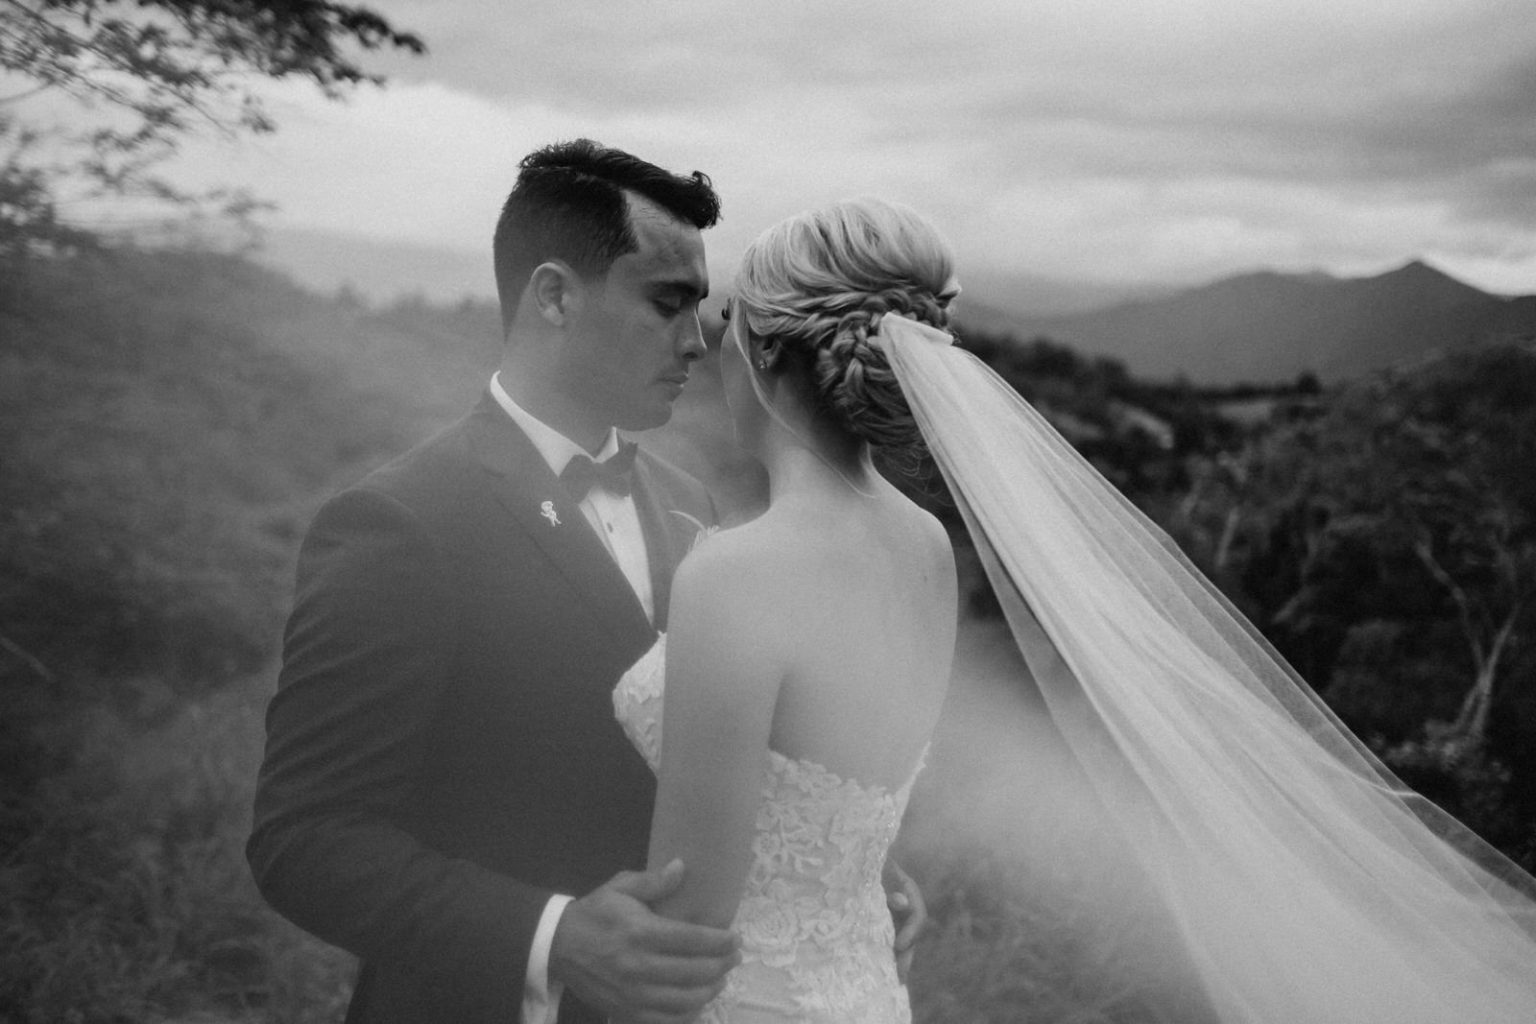 Couple on their wedding day in Brisbane embraced in intimate moment on mountain top.